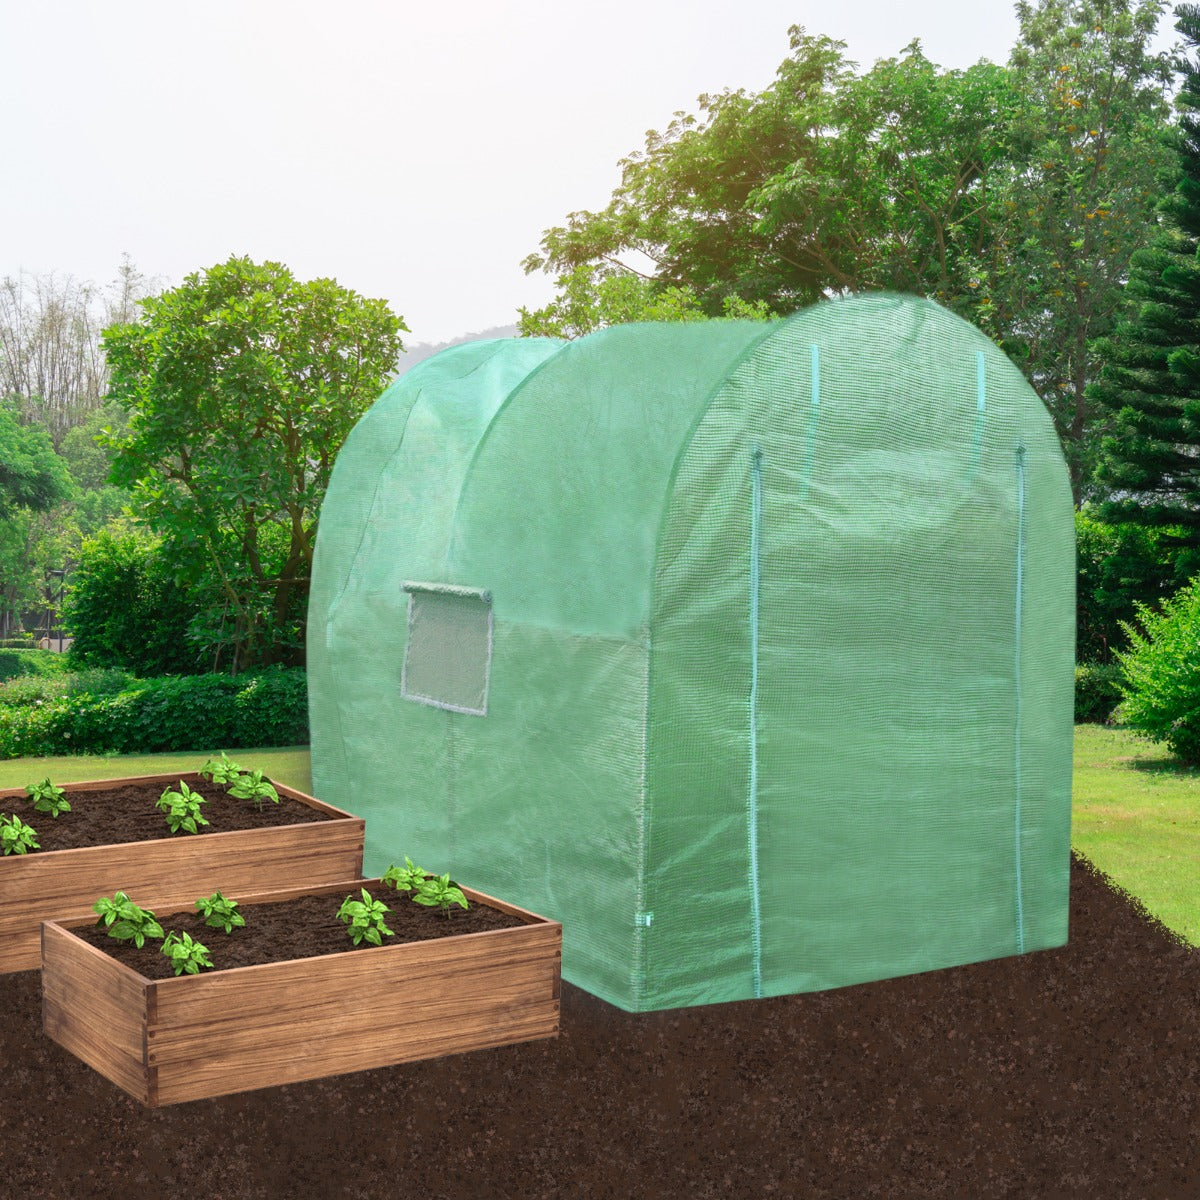 Polytunnel 19mm 3m x 2m with Racking - Like New